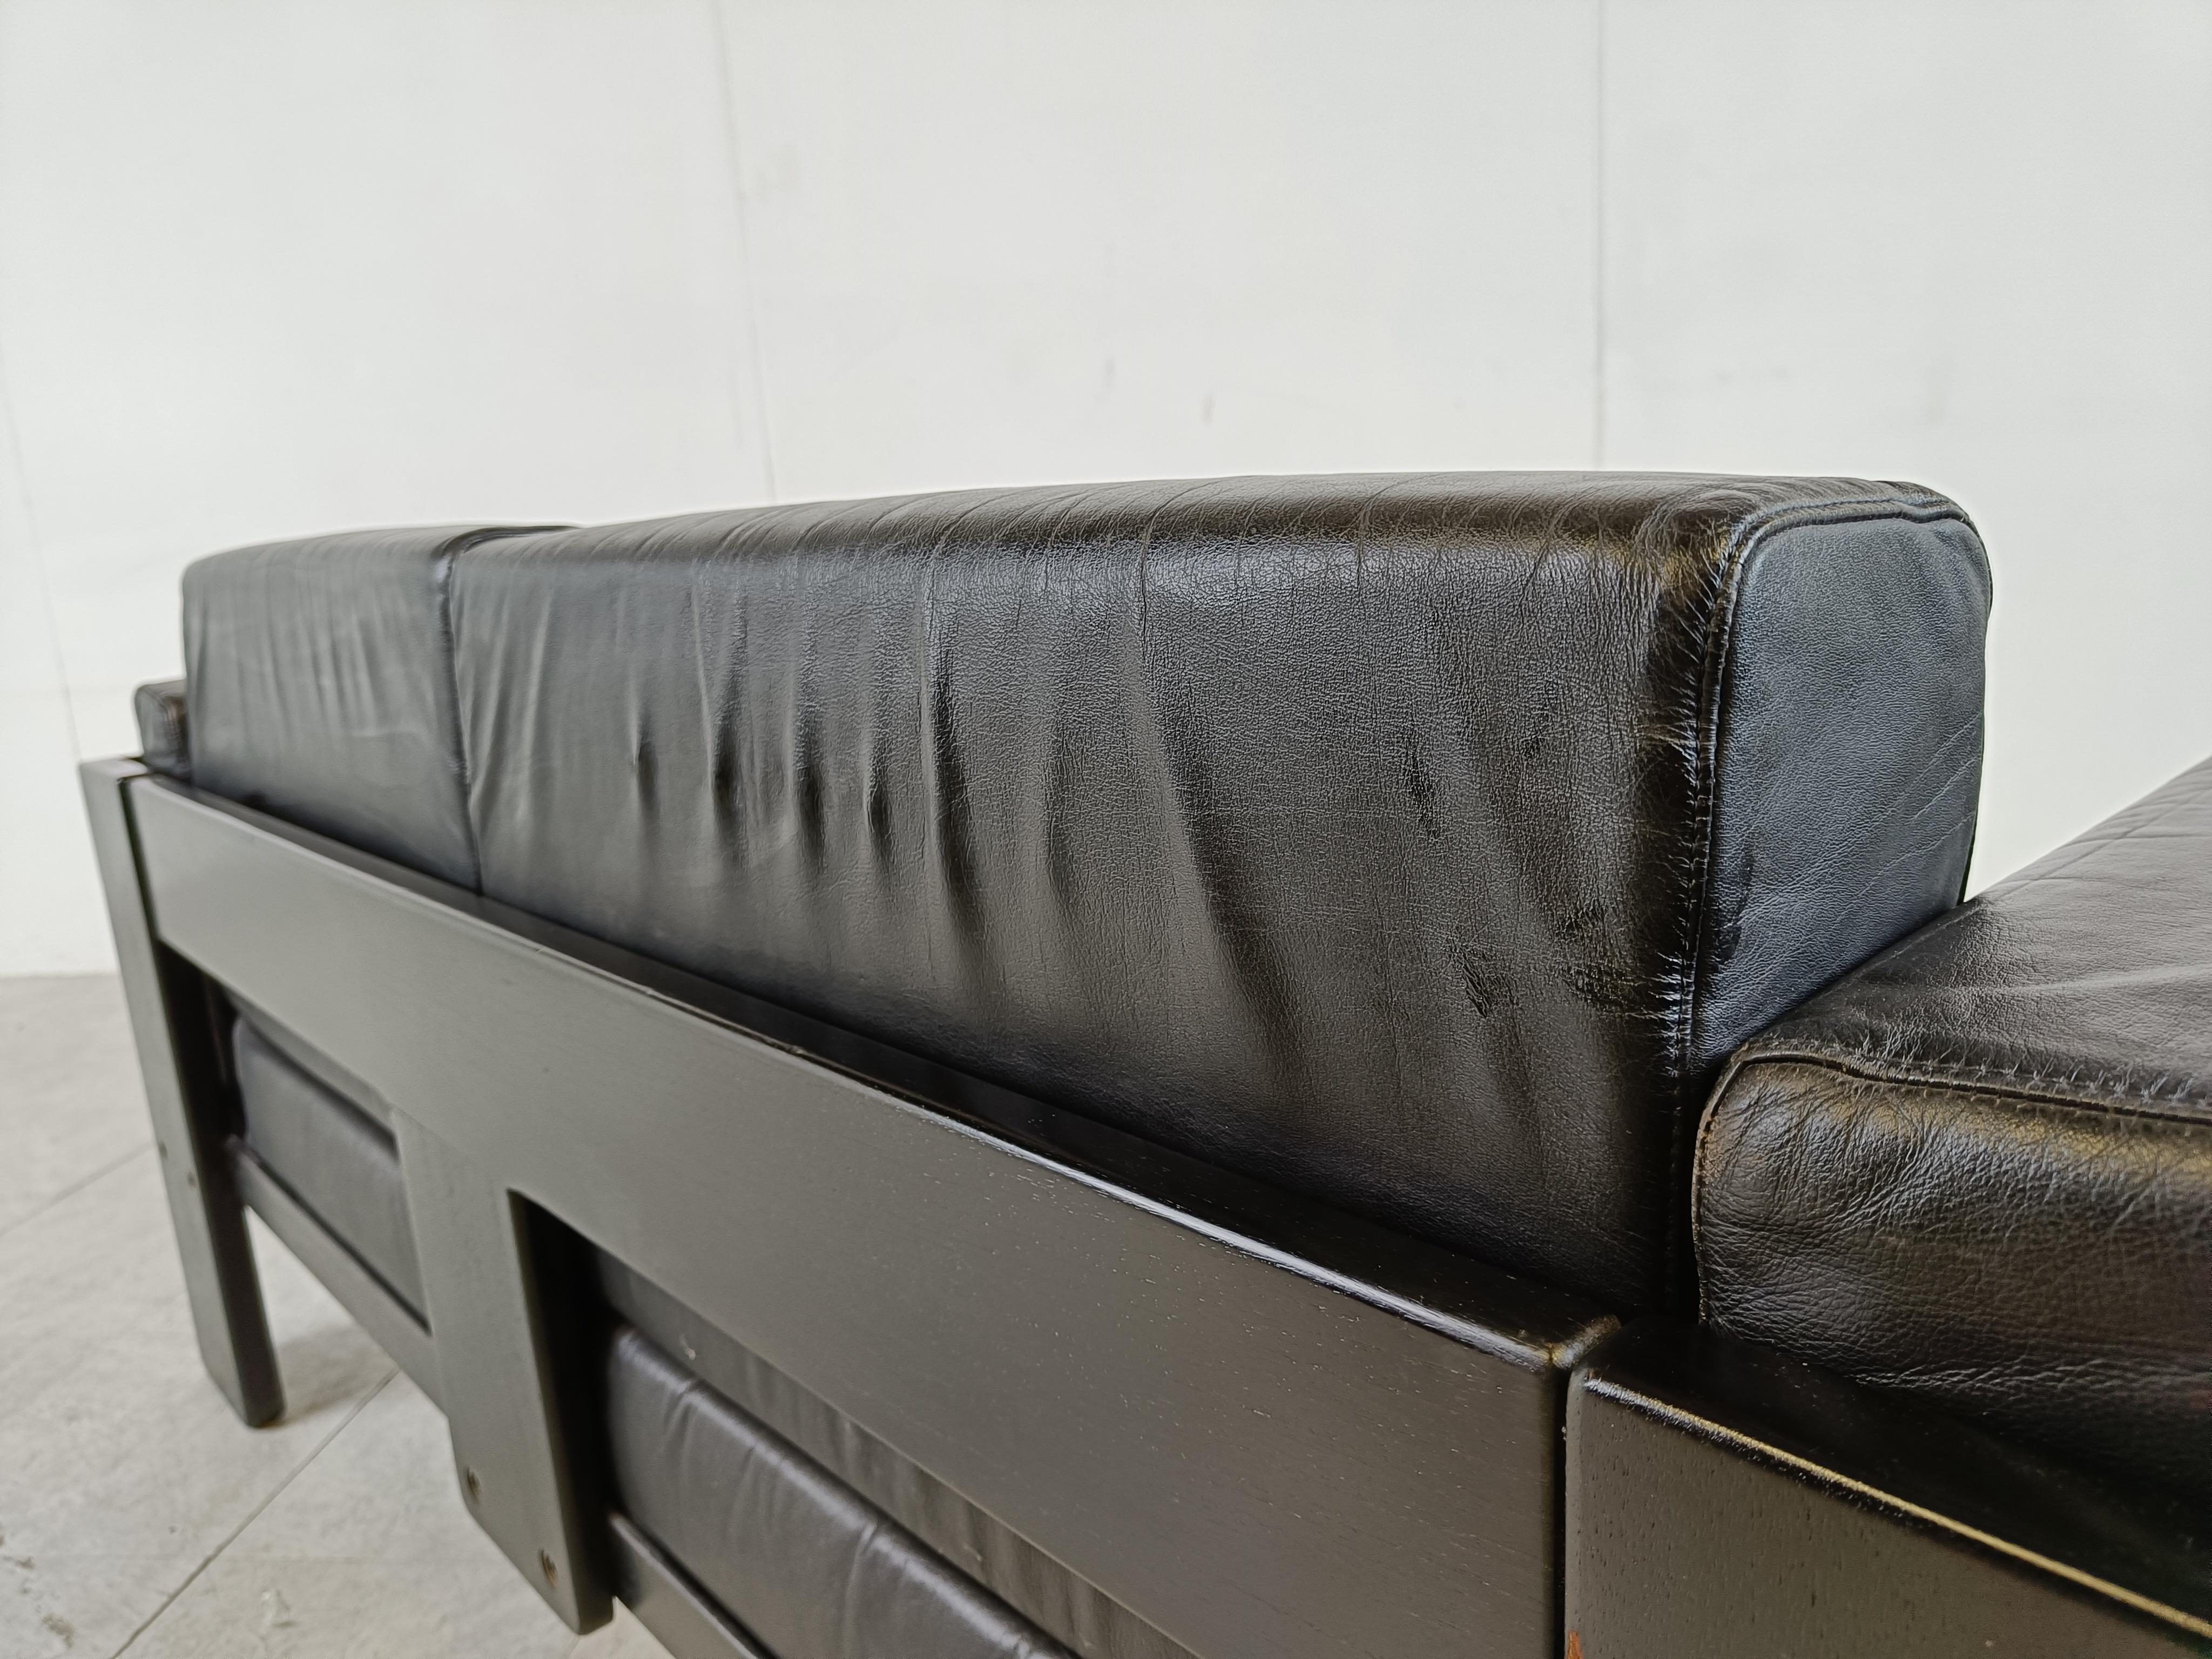 Mid century black leather and ebonized wood frame 2 seater 'bastiano' sofa designed by Tobia Scarpa and produced by Knoll.

The design dates from 1962, this one was produced in the late seventies.

1970s - Italy

Good